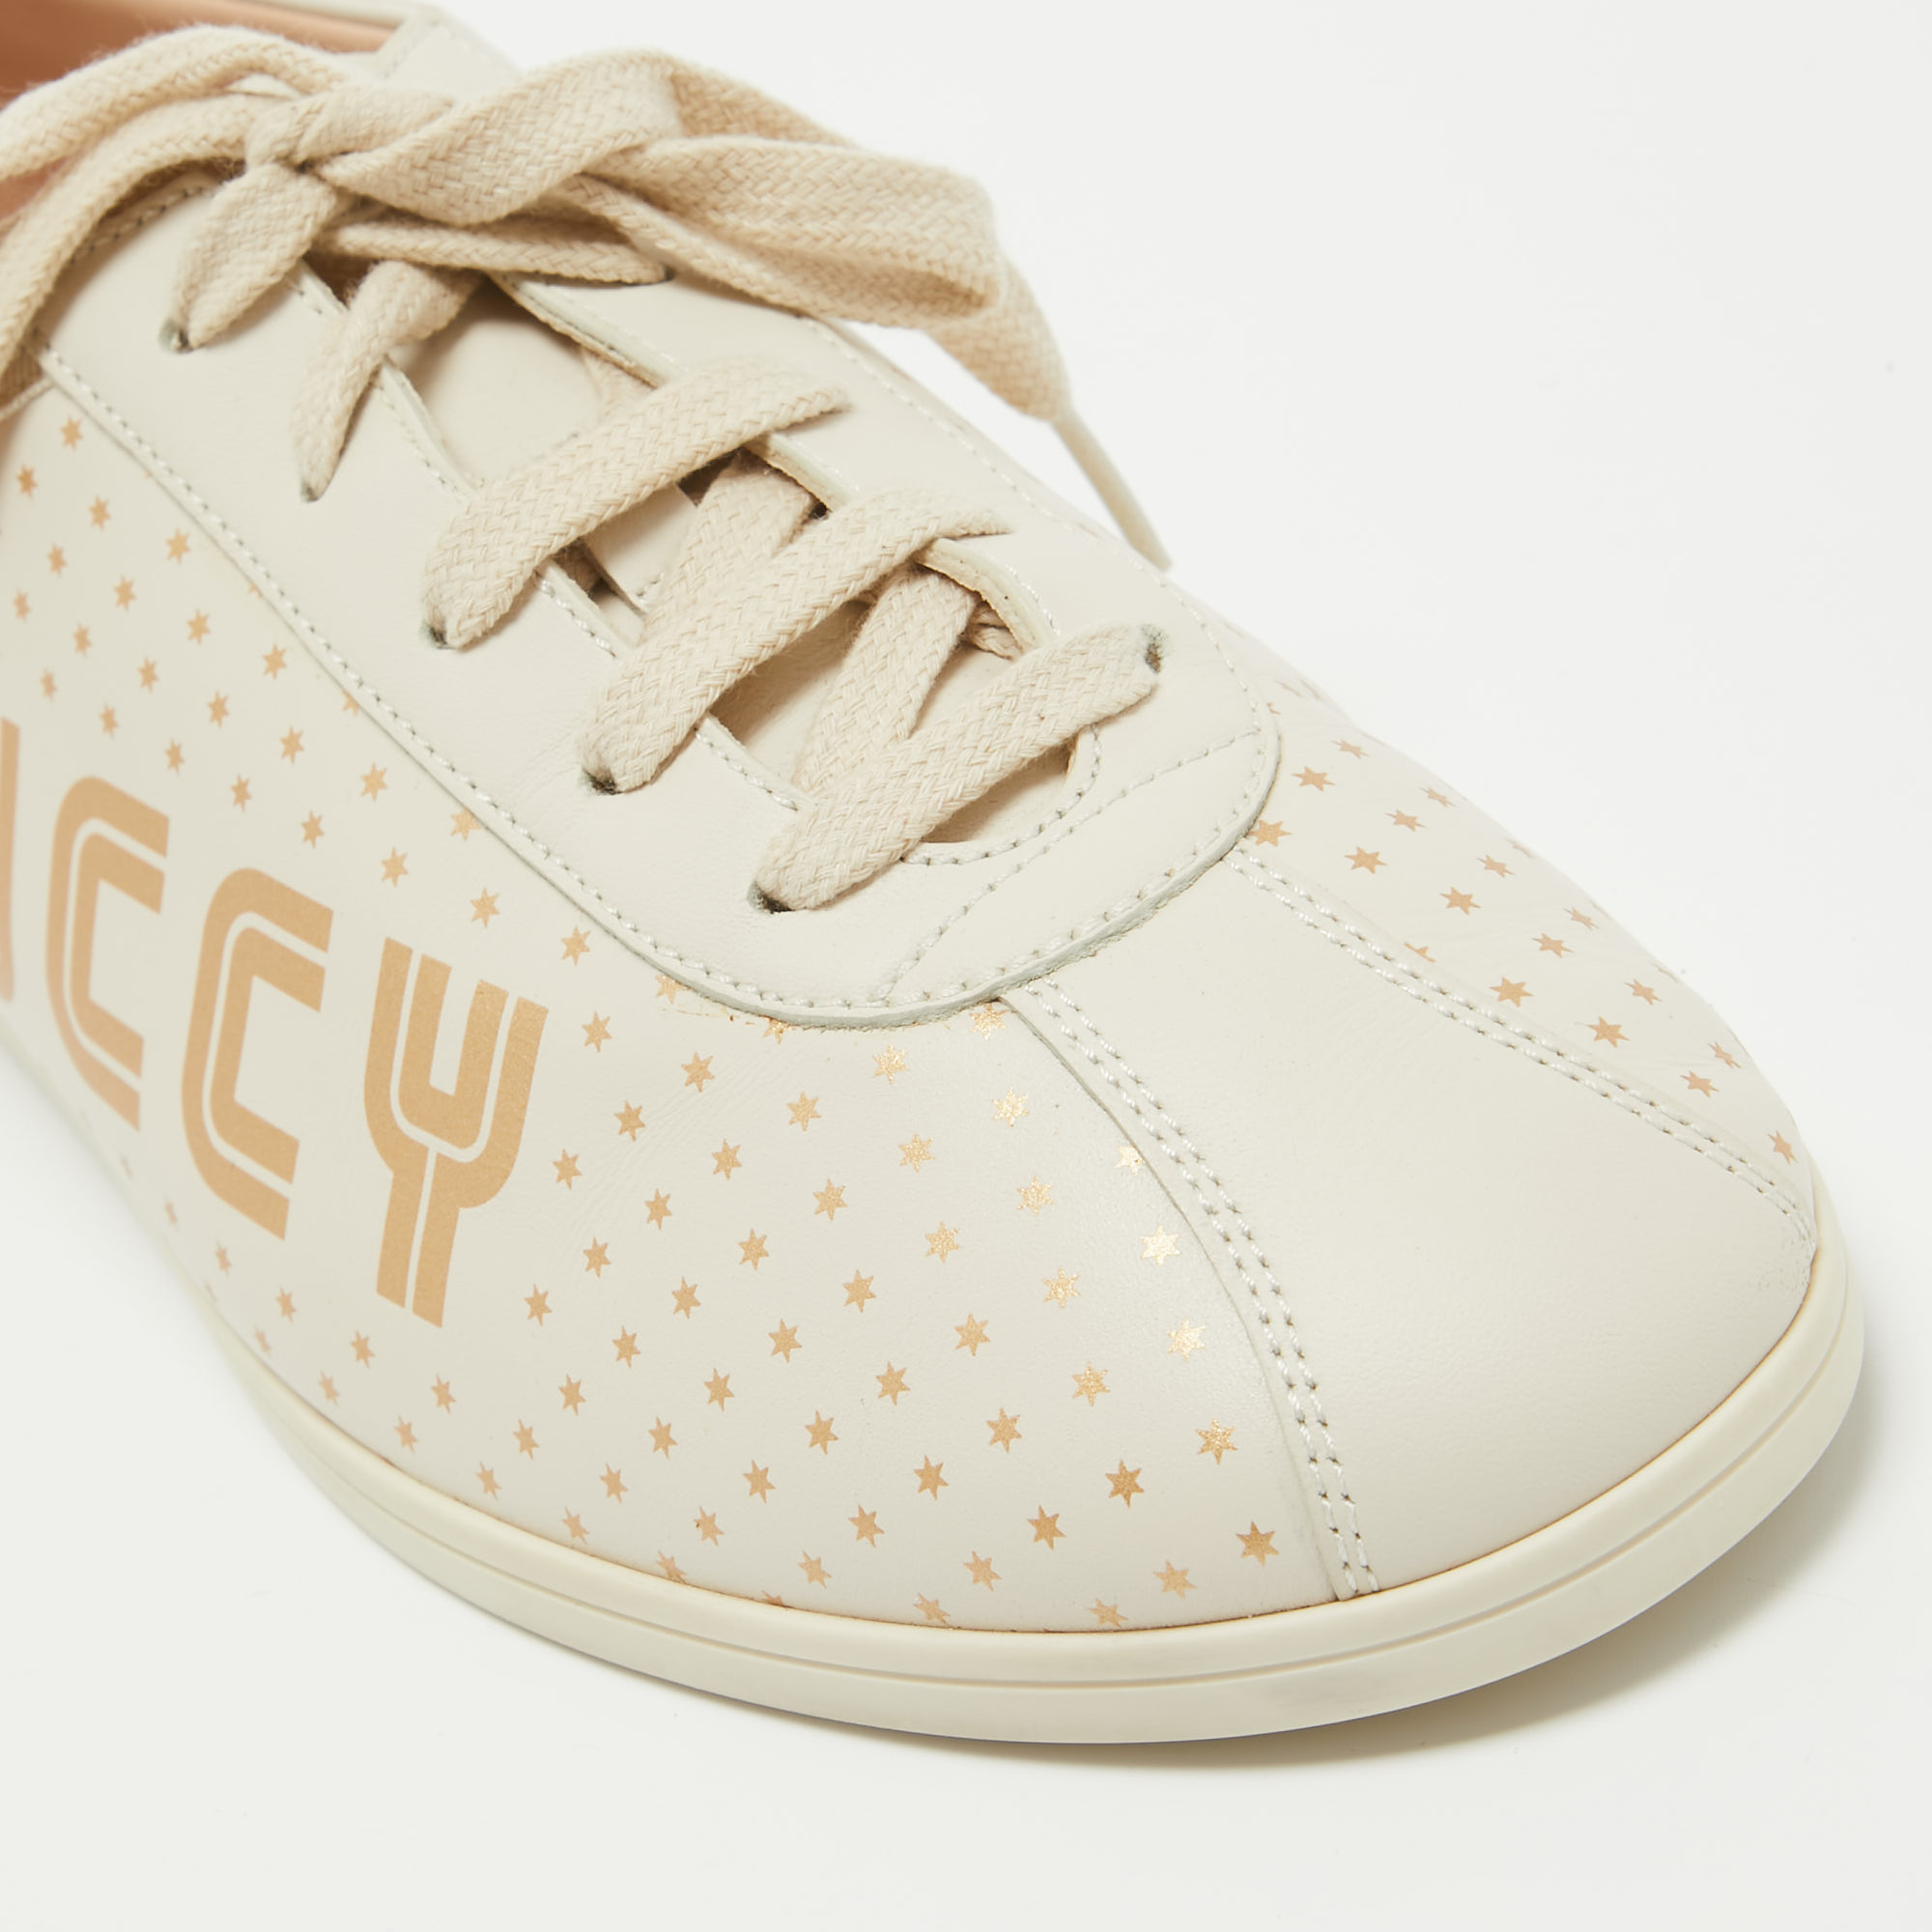 Gucci Cream Leather Falacer Low Top Sneakers Size 40